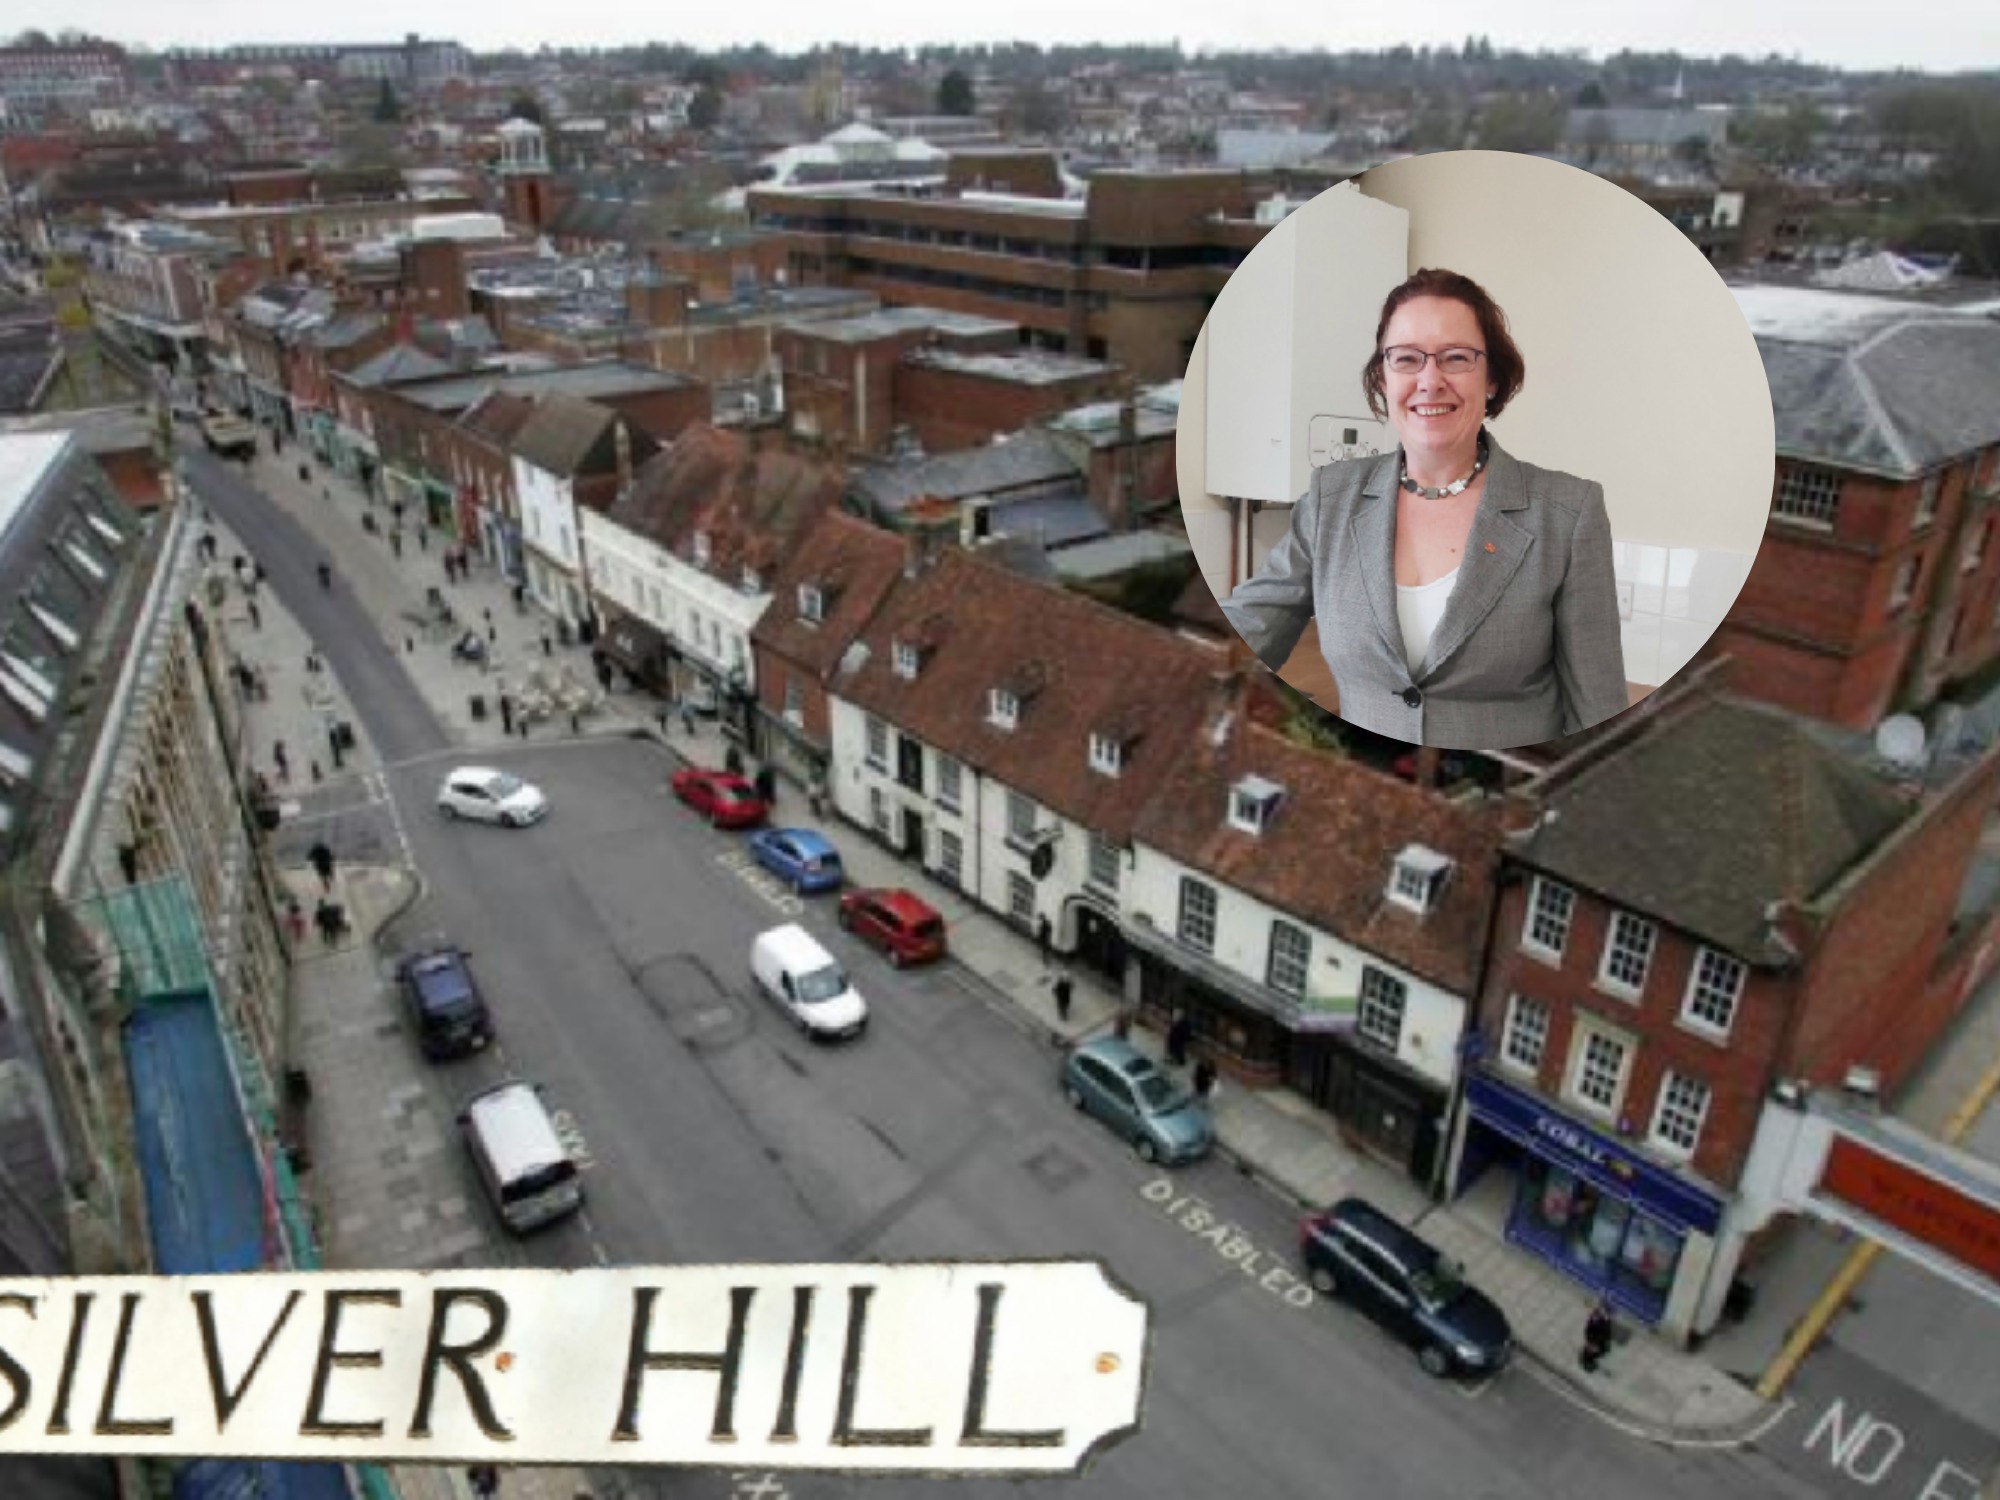 The Silver Hill site; inset, Cllr Kelsie Learney